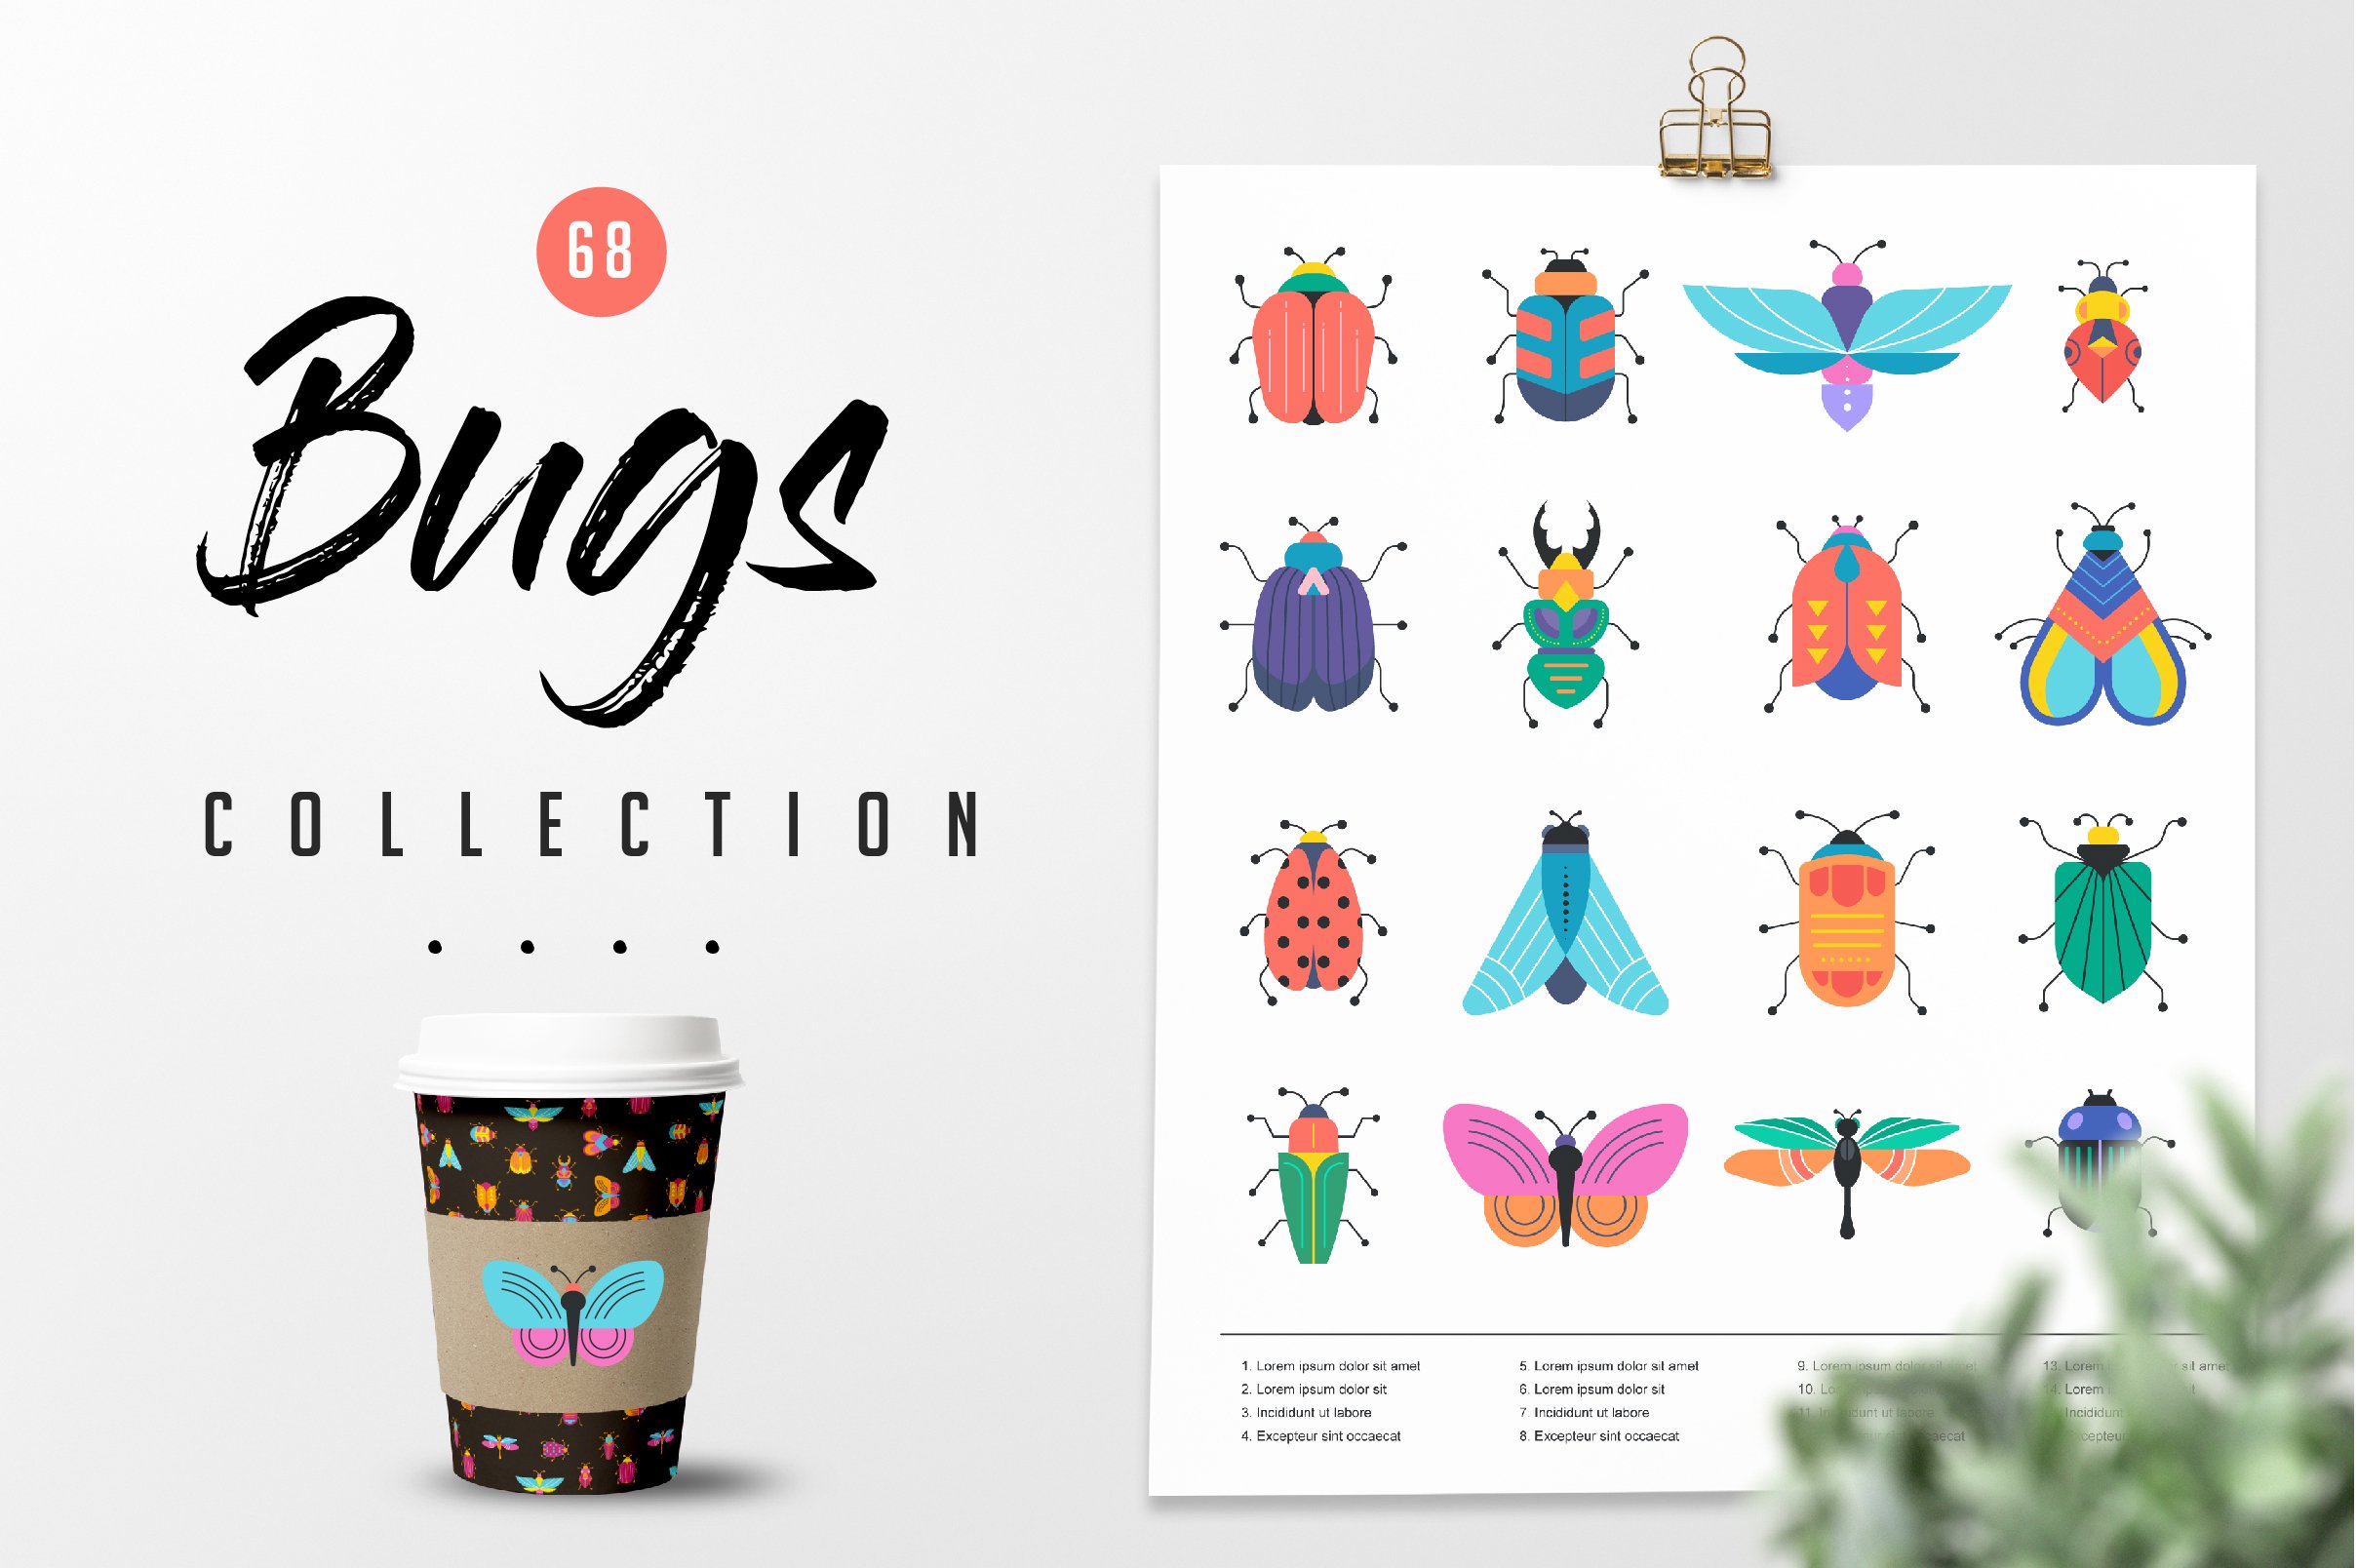 Bugs and insects collection cover image.